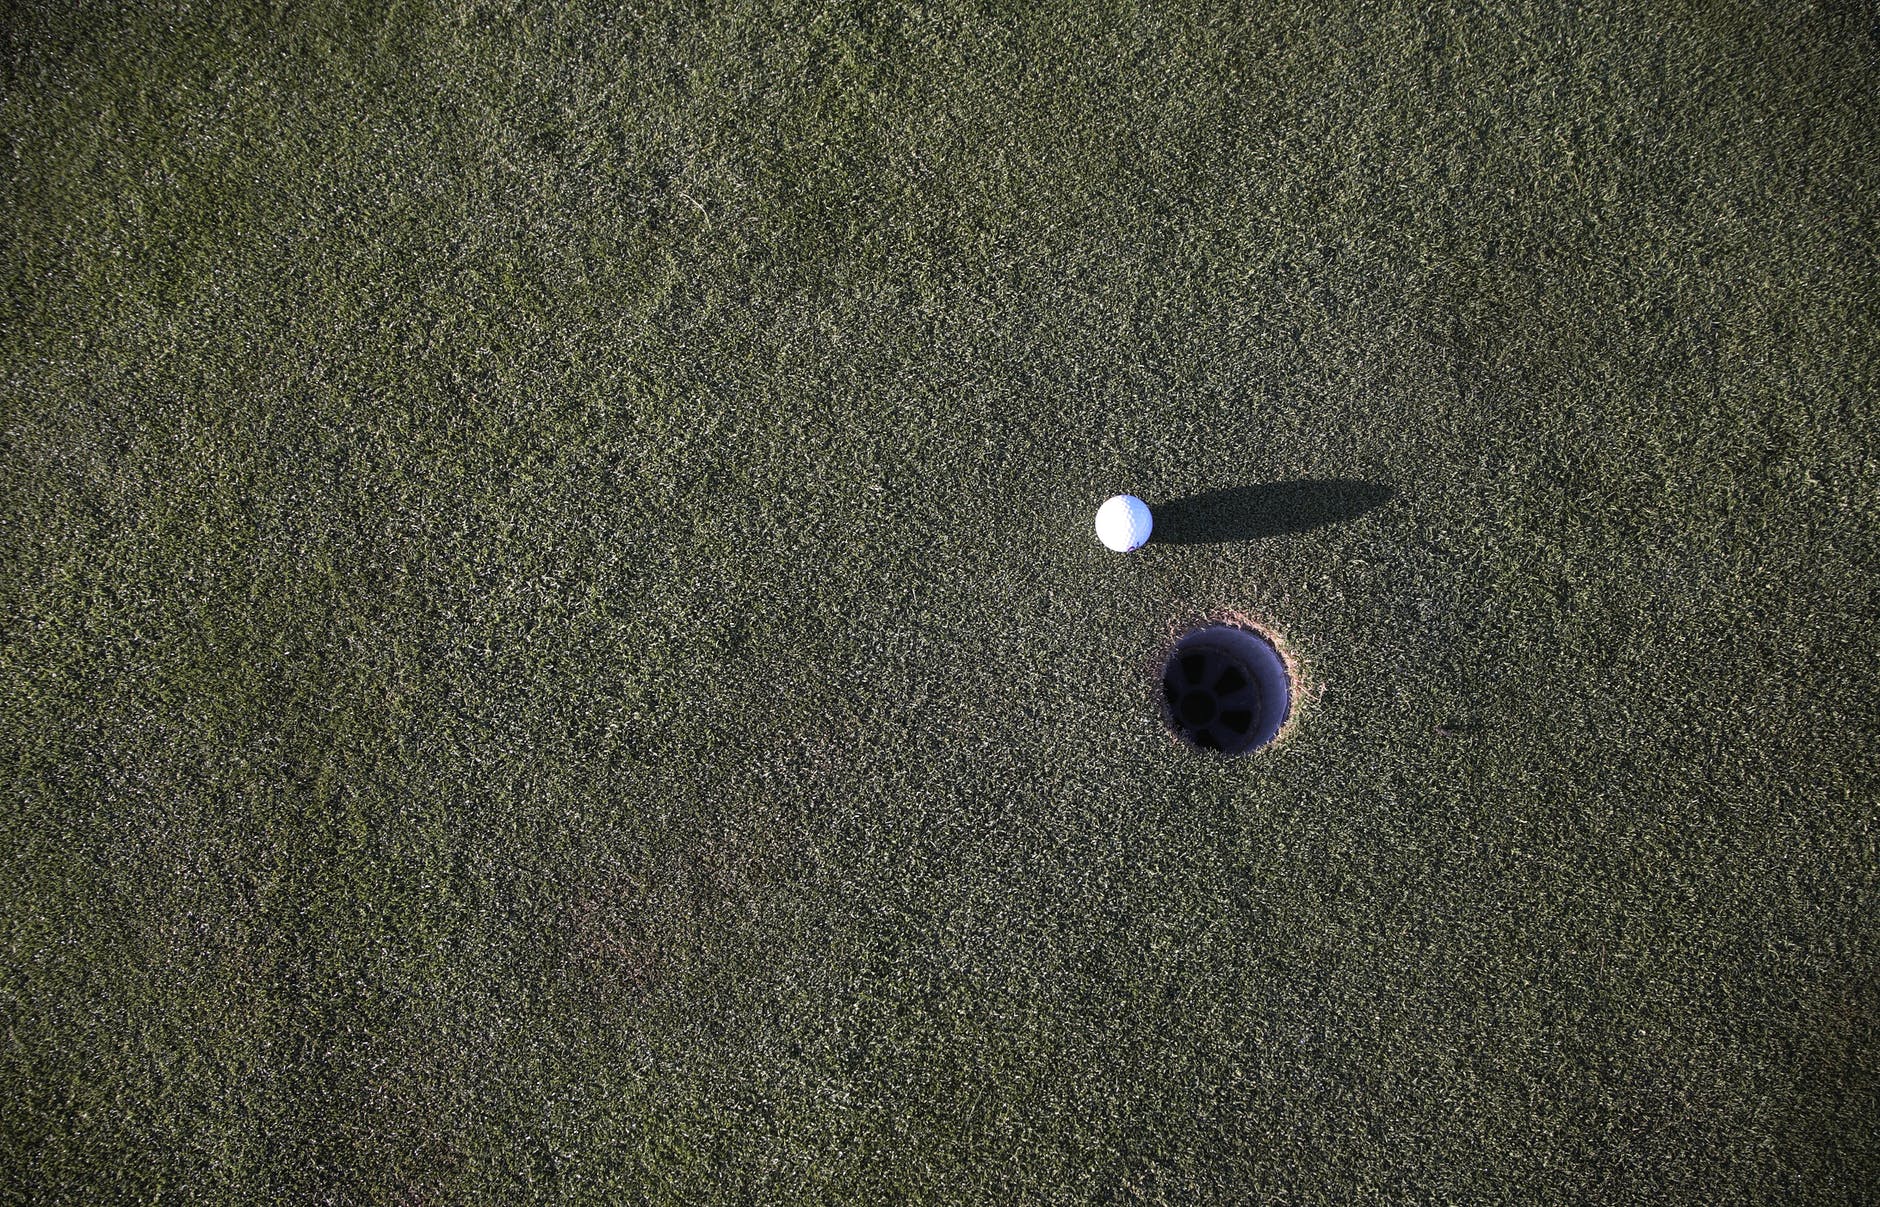 What Is The Average Golf Score For 18 Holes?